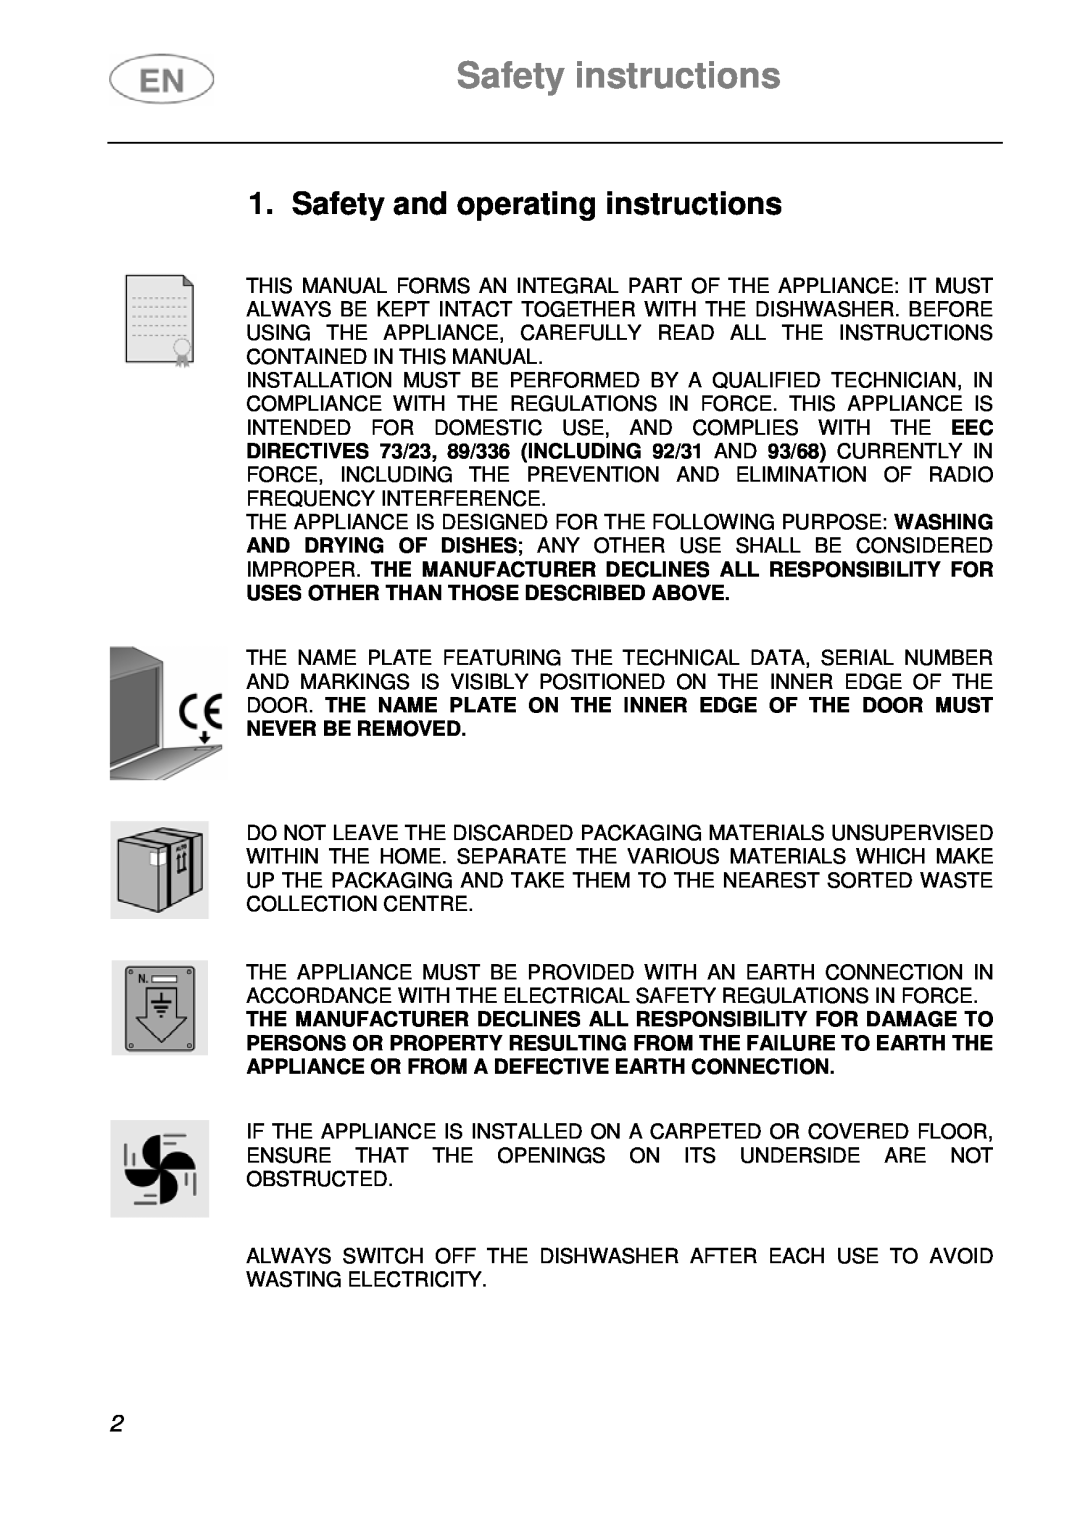 Smeg LSA14X7 Safety instructions, Safety and operating instructions, Uses Other Than Those Described Above 